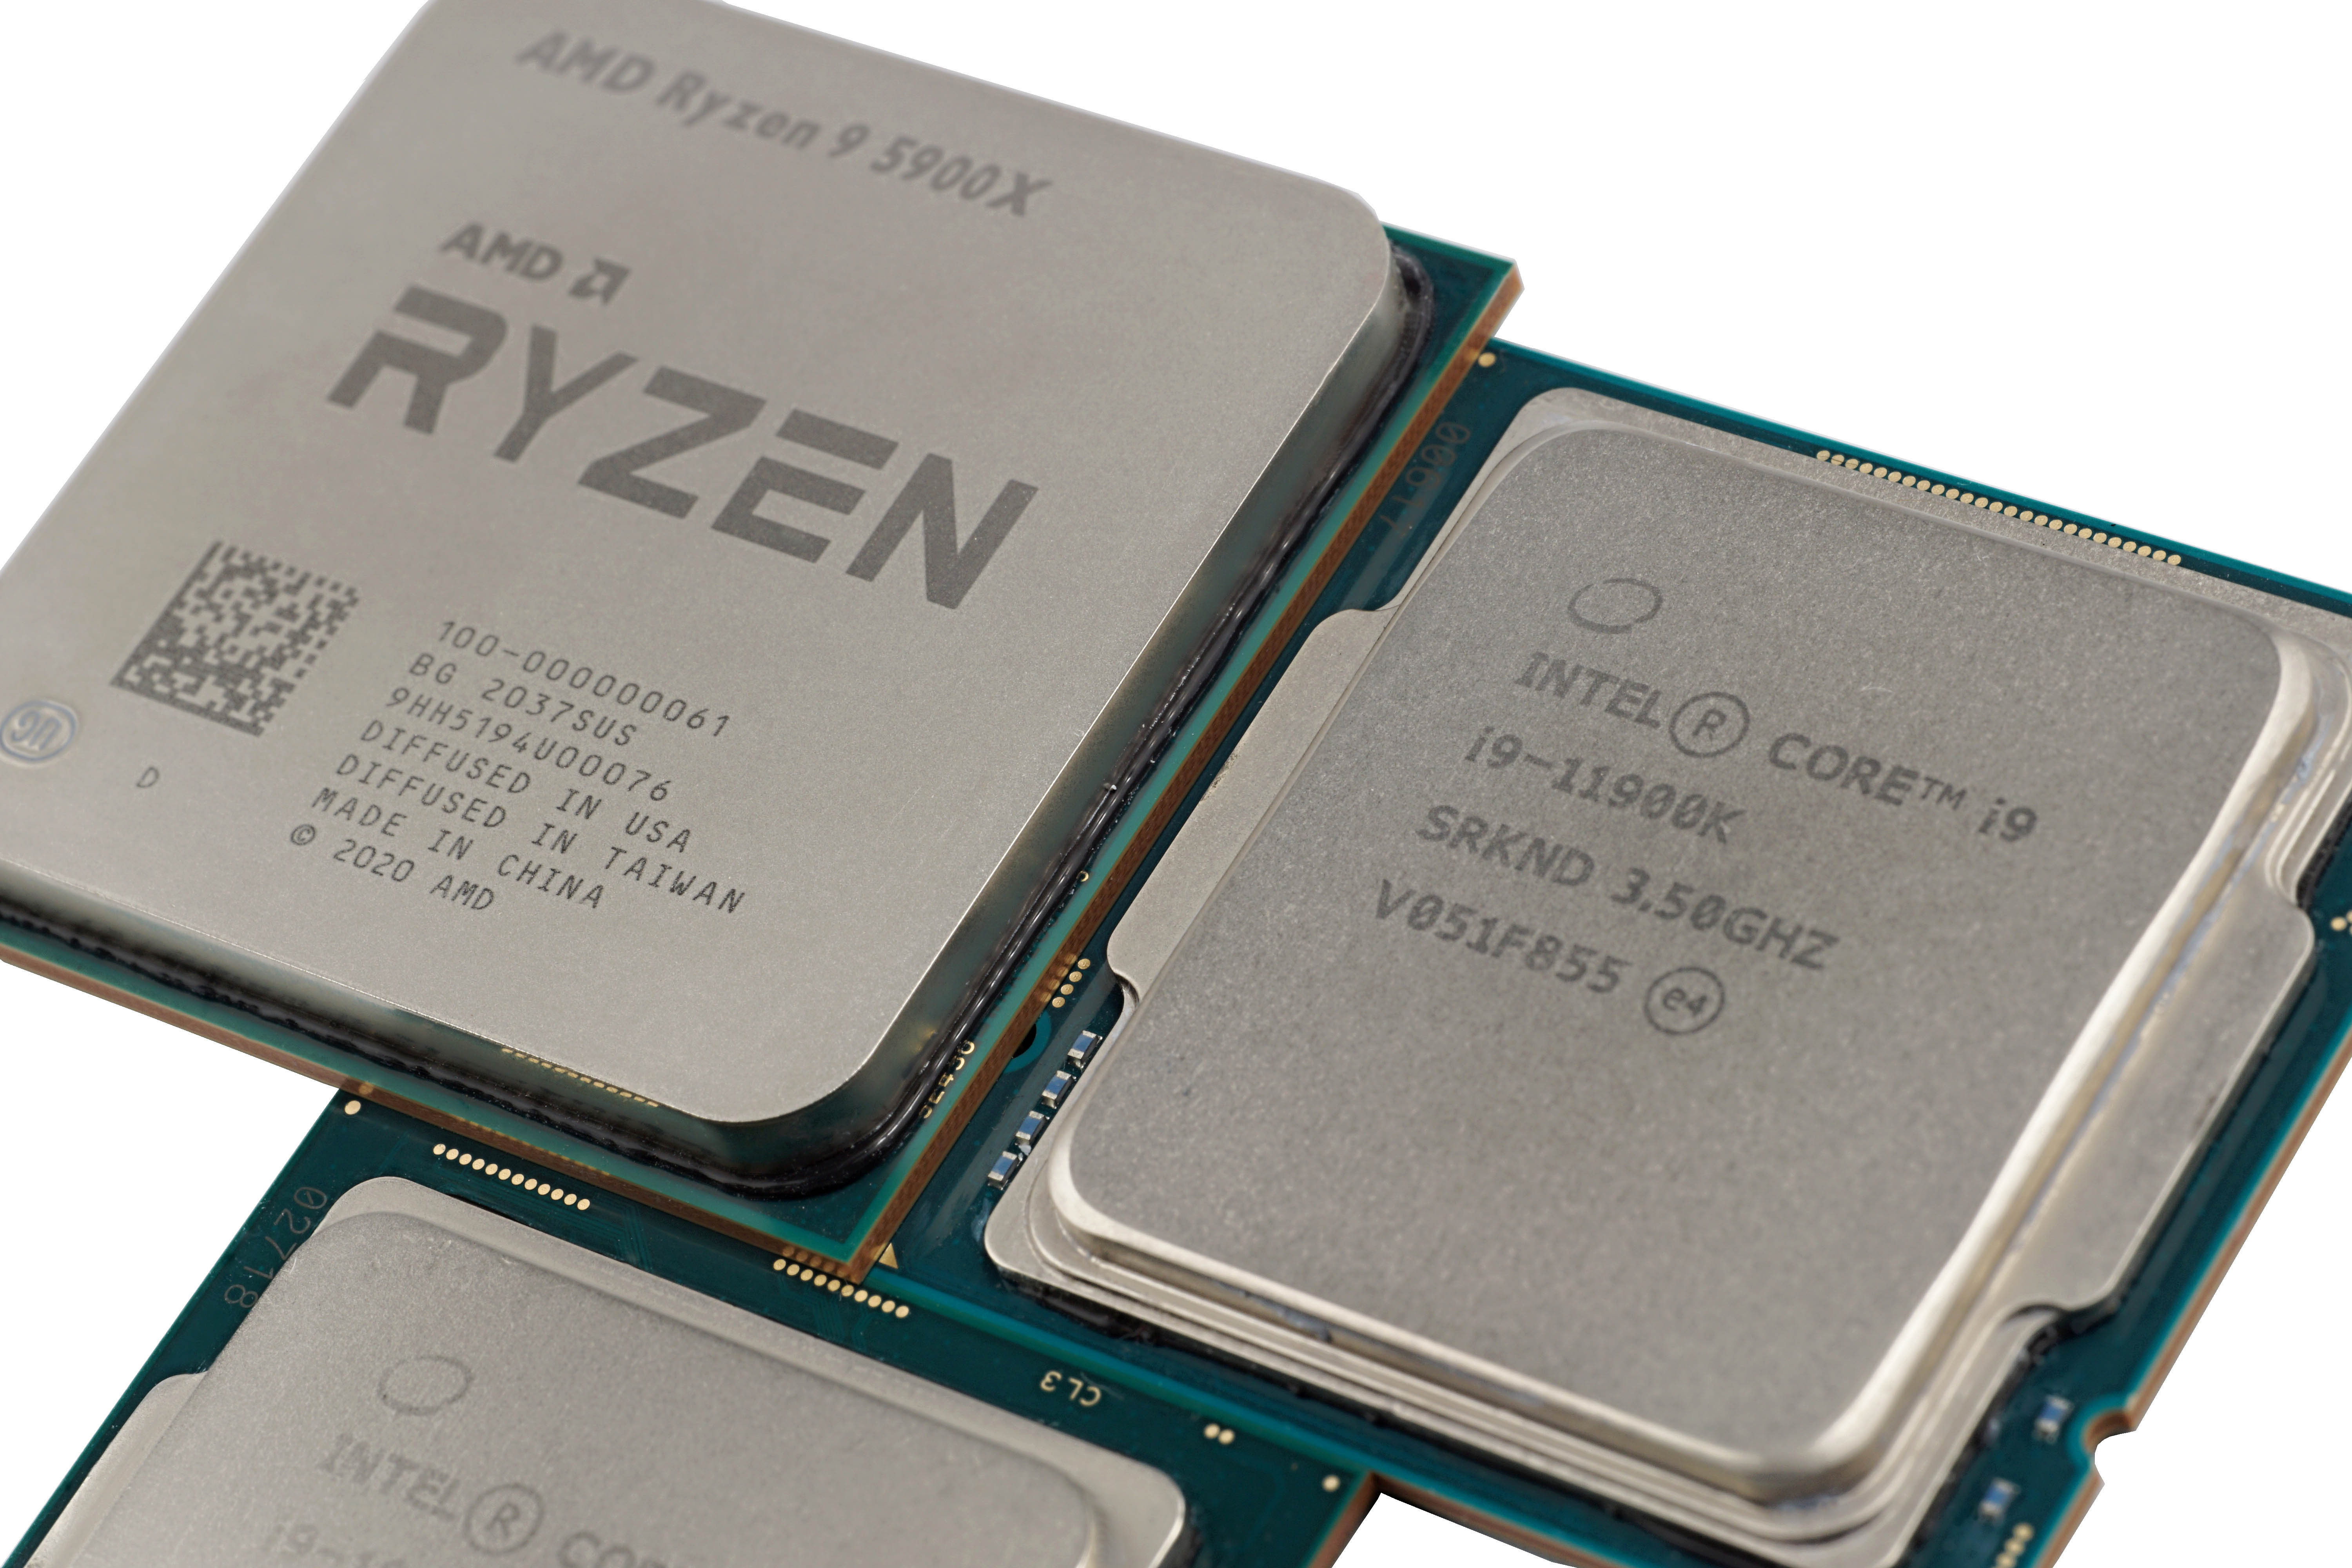 Intel Core i9-11900K review: taking the fight to AMD's Ryzen 9 5900X